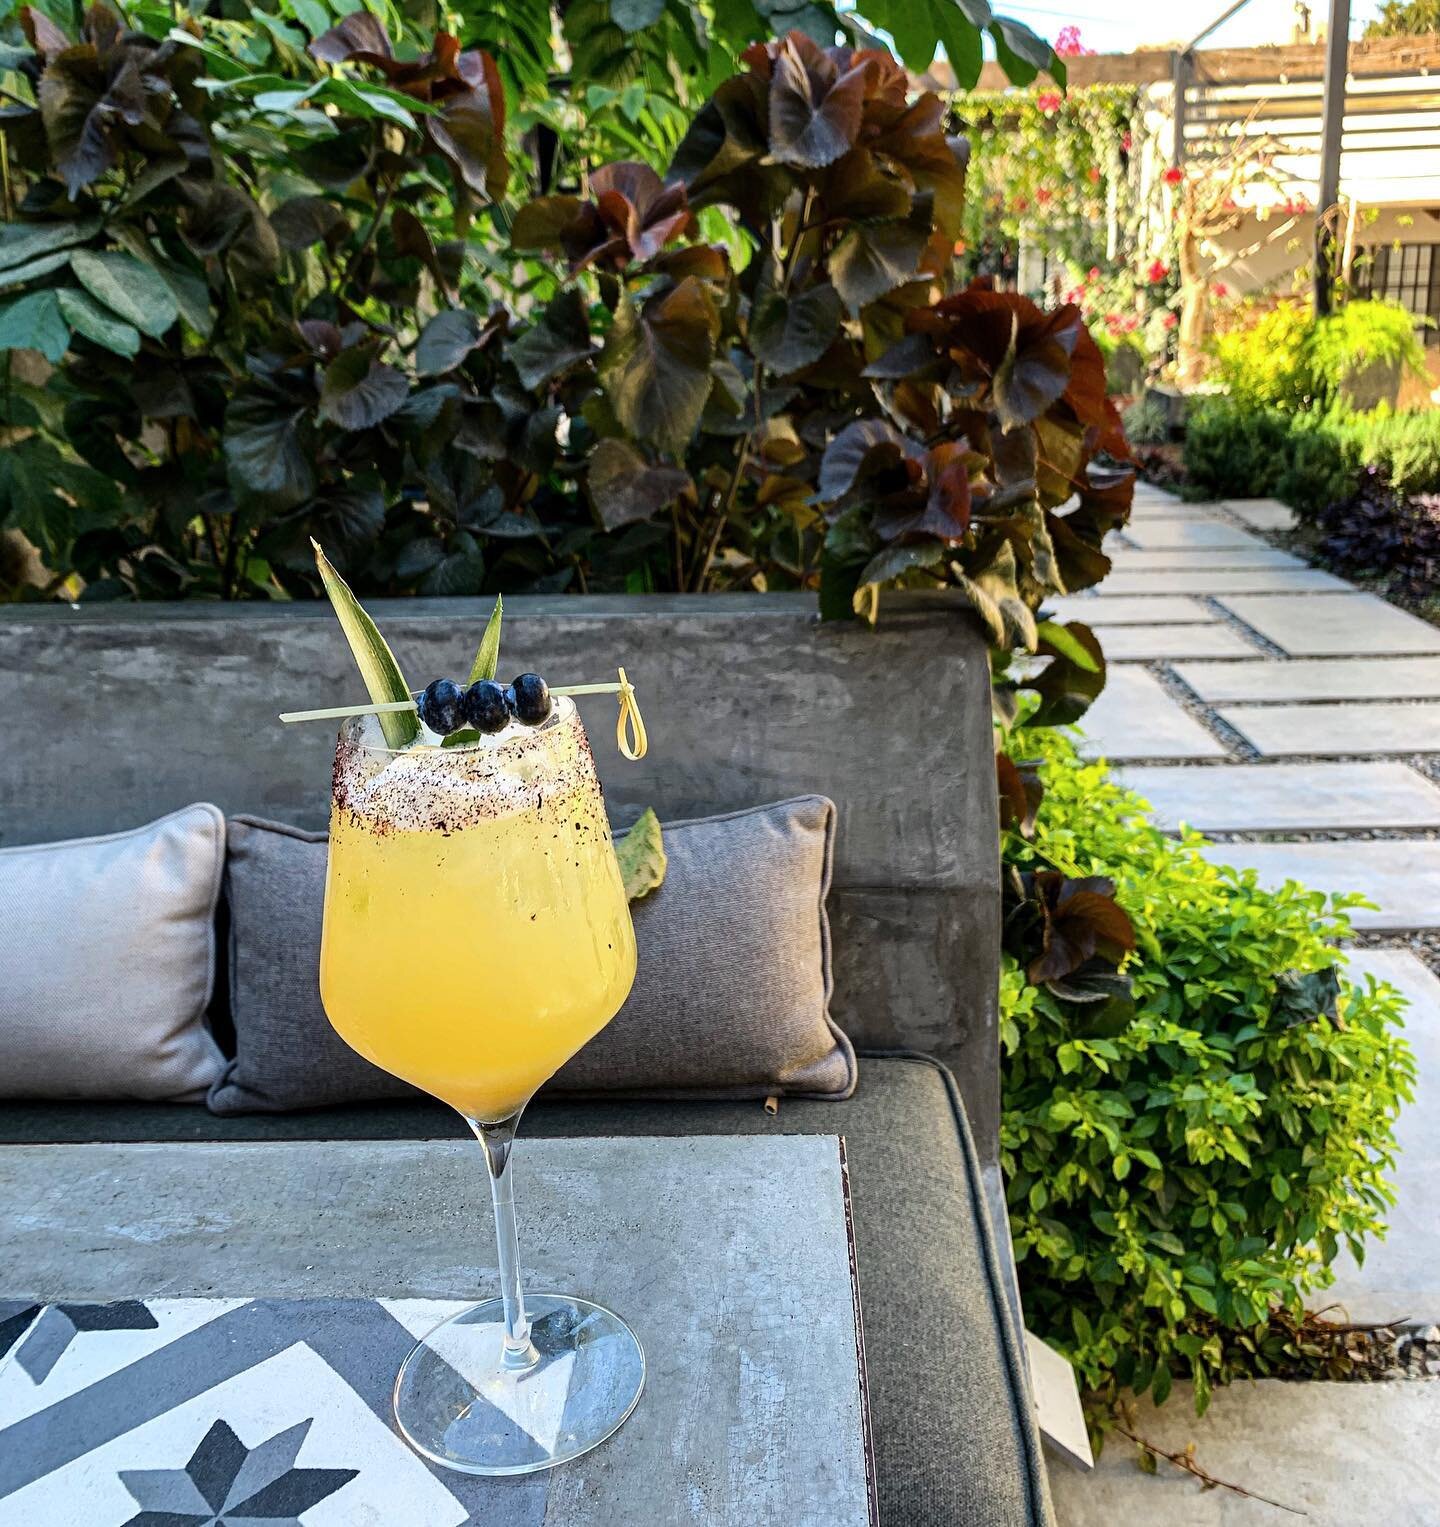 Your new S U N D A Y ✨ V I B E awaits.
⁣
🆆🅷🅰🆃 Live music, piña &amp; bourbon infused Spritz cocktails, Bacon Old Fashioneds, pizza topped with quail eggs, serrano ham, fresh mozzarella &amp; more ...all tucked inside a magical, secret garden oas